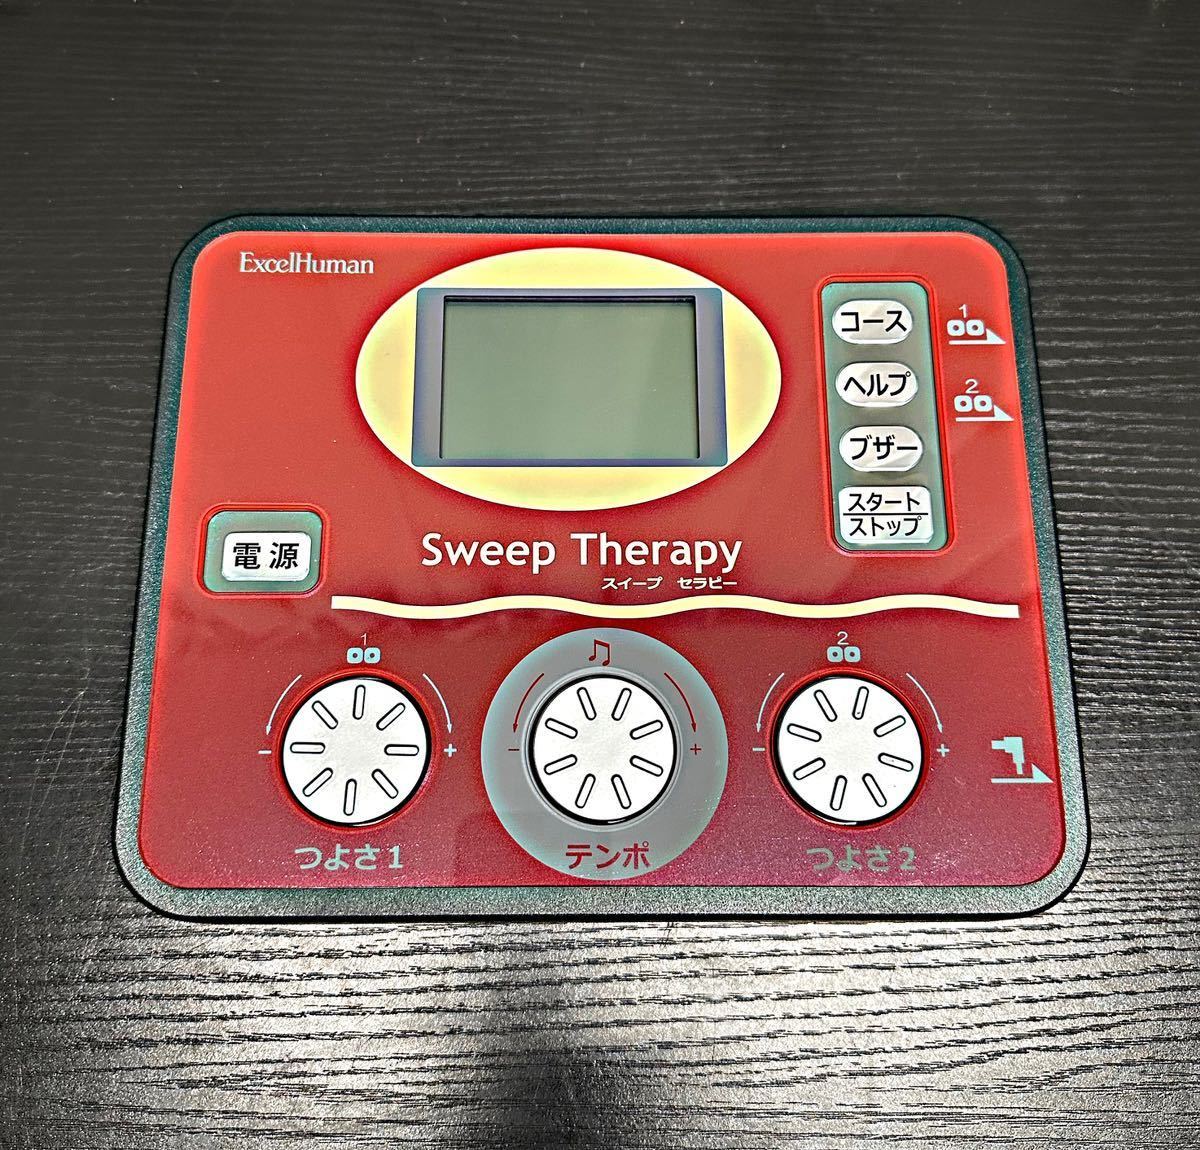 ExcelHuman/エクセルヒューマン★Sweep Therapy/スイープ セラピー★家庭用電気治療器★LFP2EX★224AGBZX00109A02★ジャンク★012631_画像1